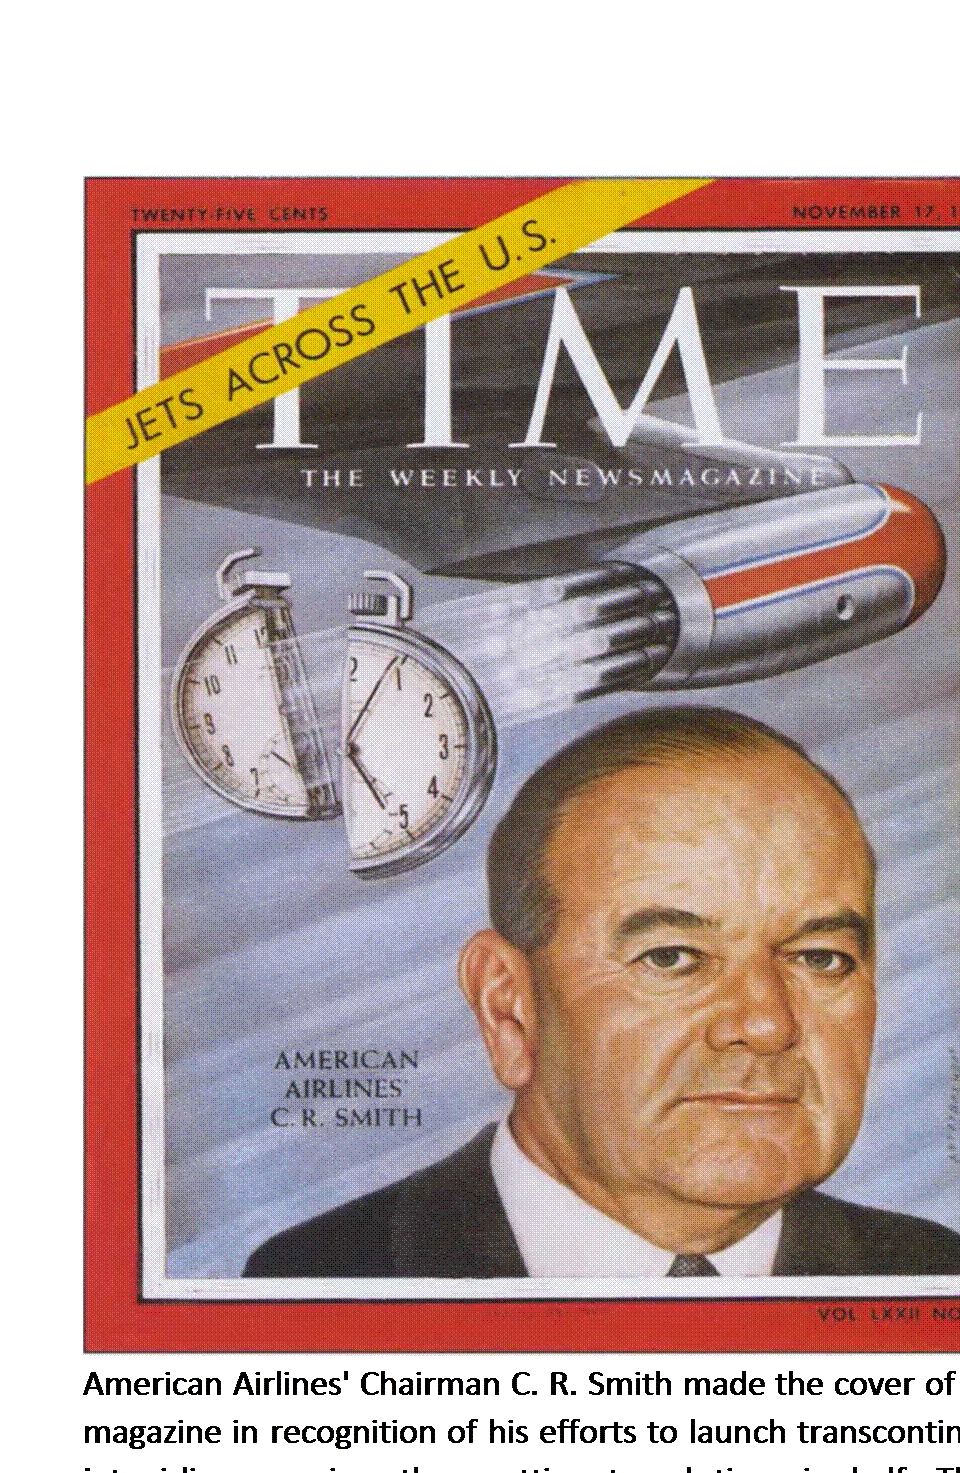 Подпись: American Airlines' Chairman C. R. Smith made the cover of TIME magazine in recognition of his efforts to launch transcontinental jet airliner service, thus cutting travel time in half. This is symbolically represented in this masterful portrait by artist Boris Artzybasheff with the depiction of a watch literally being sliced in half by the jet exhaust at upper left. (Craig Kodera Collection) 